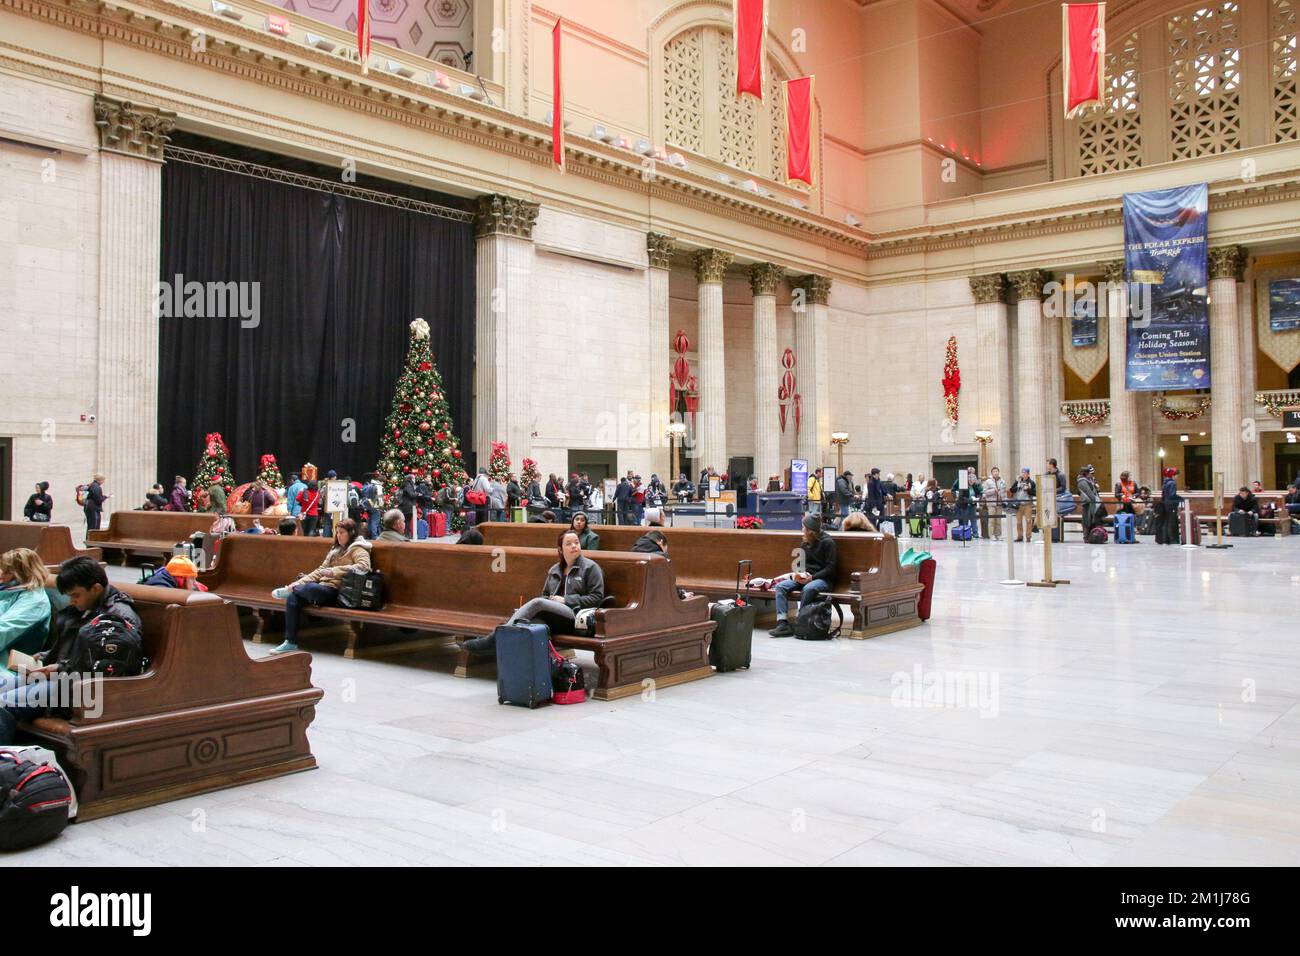 Holiday travelers in the Great Hall of Chicago's Union Station. Stock Photo